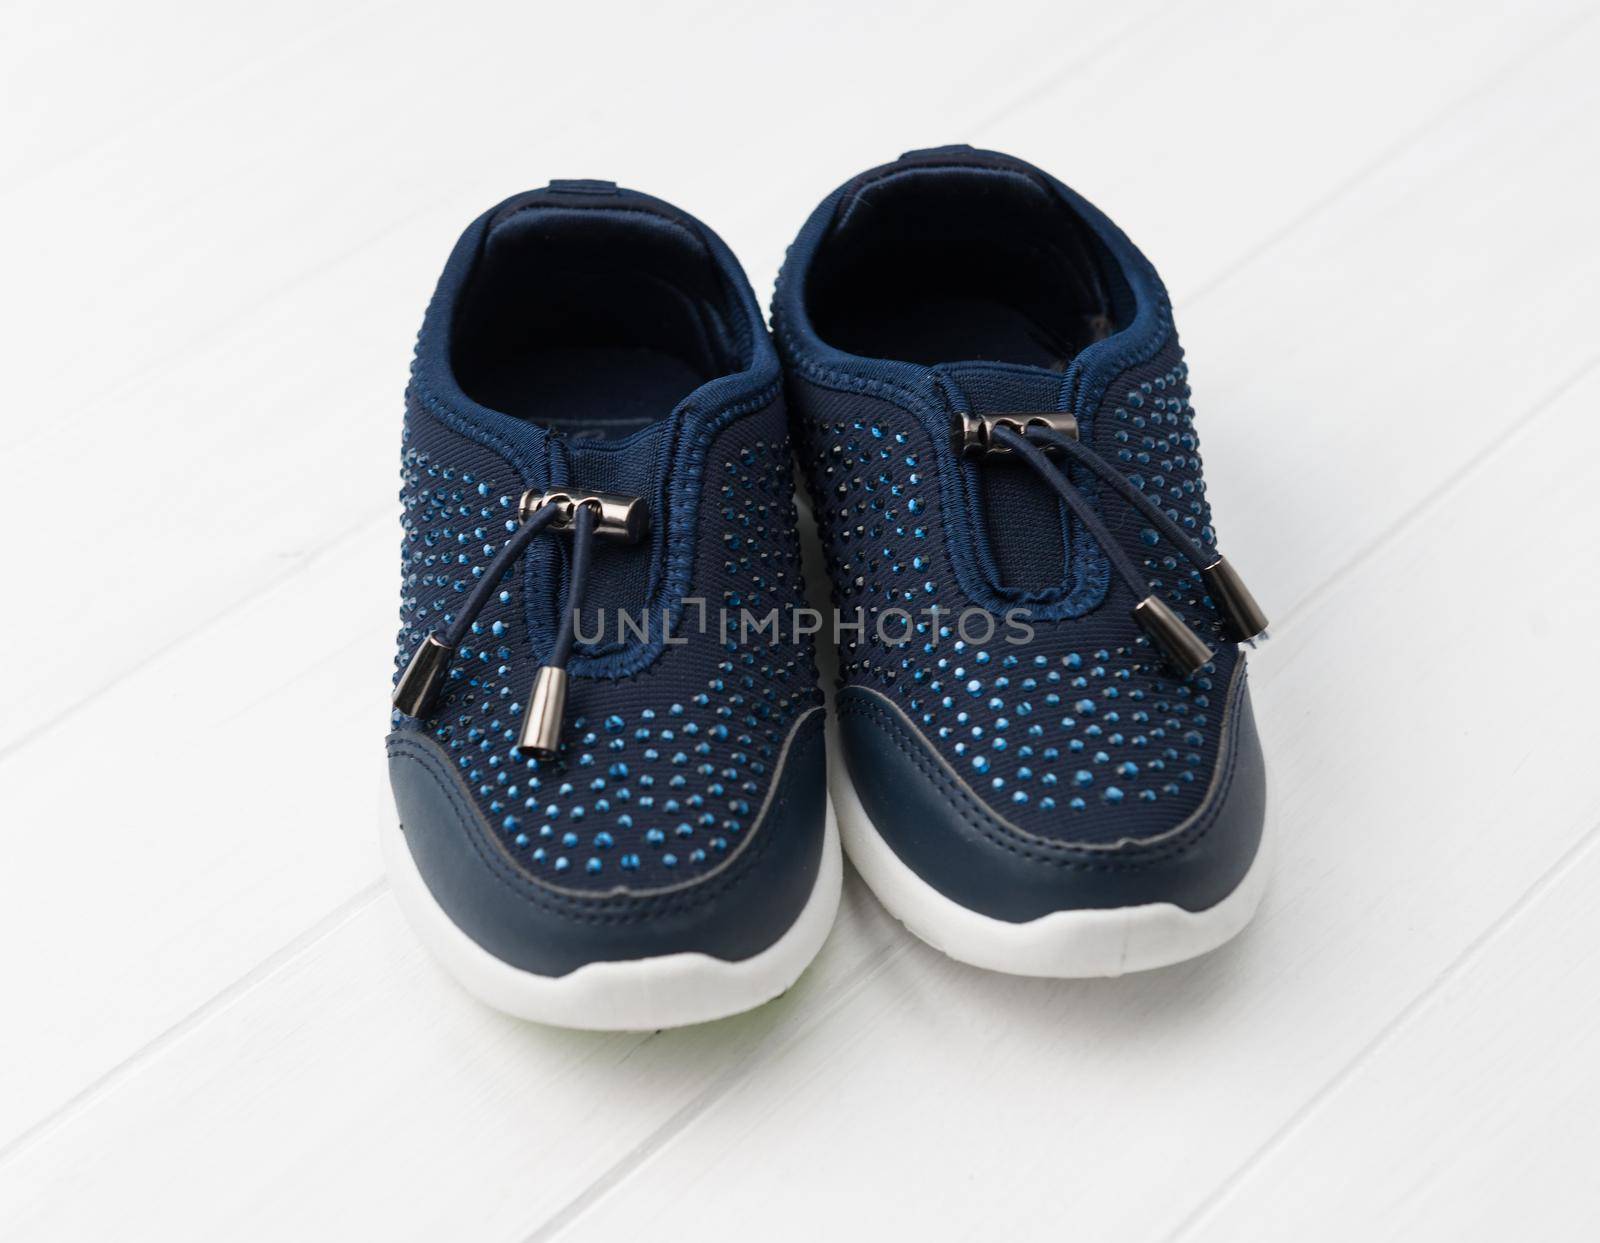 Dark blue sneakers with deep blue stones, white soles, comfy for running